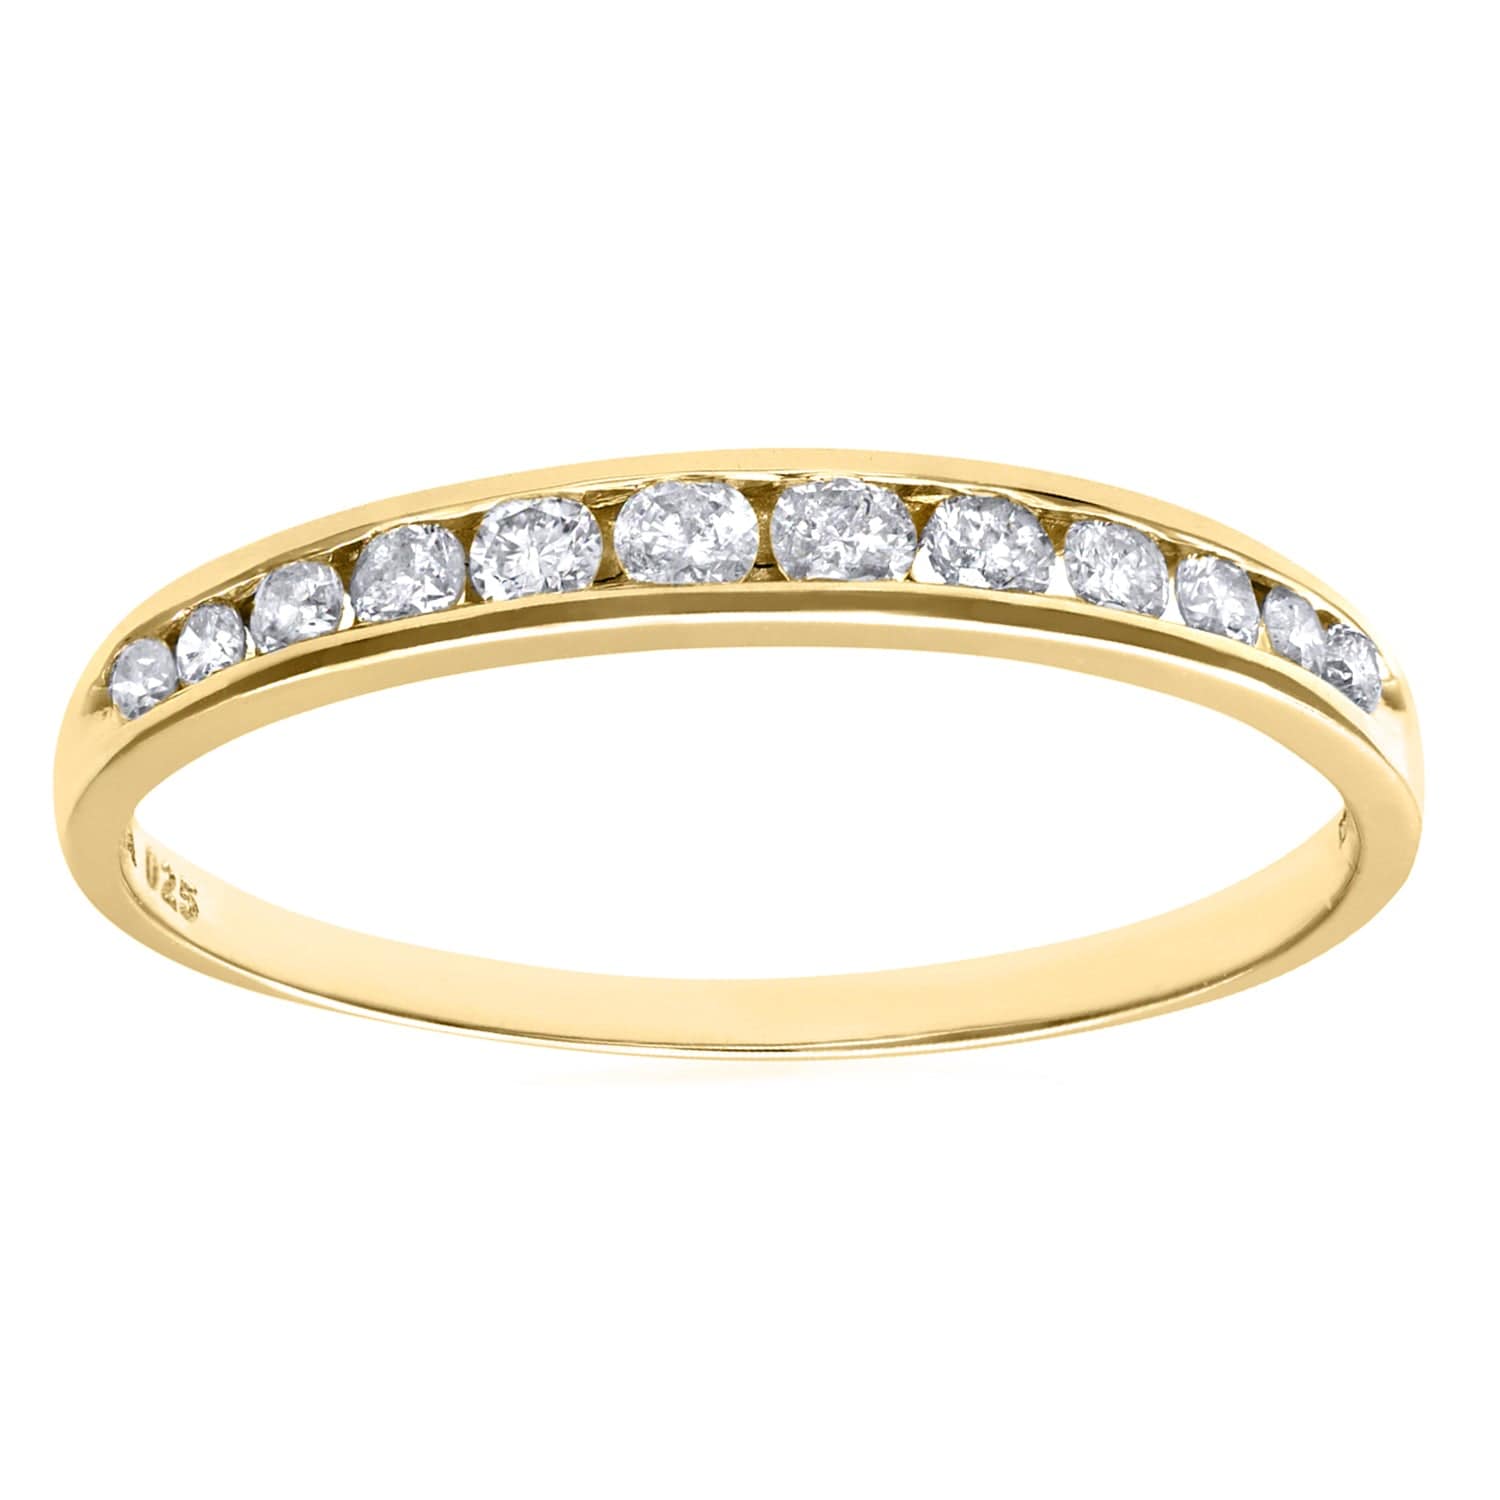 Lynora Luxe Ring Yellow Gold 9ct / Diamond 9ct Yellow Gold 0.25ct Diamond Eternity Ring